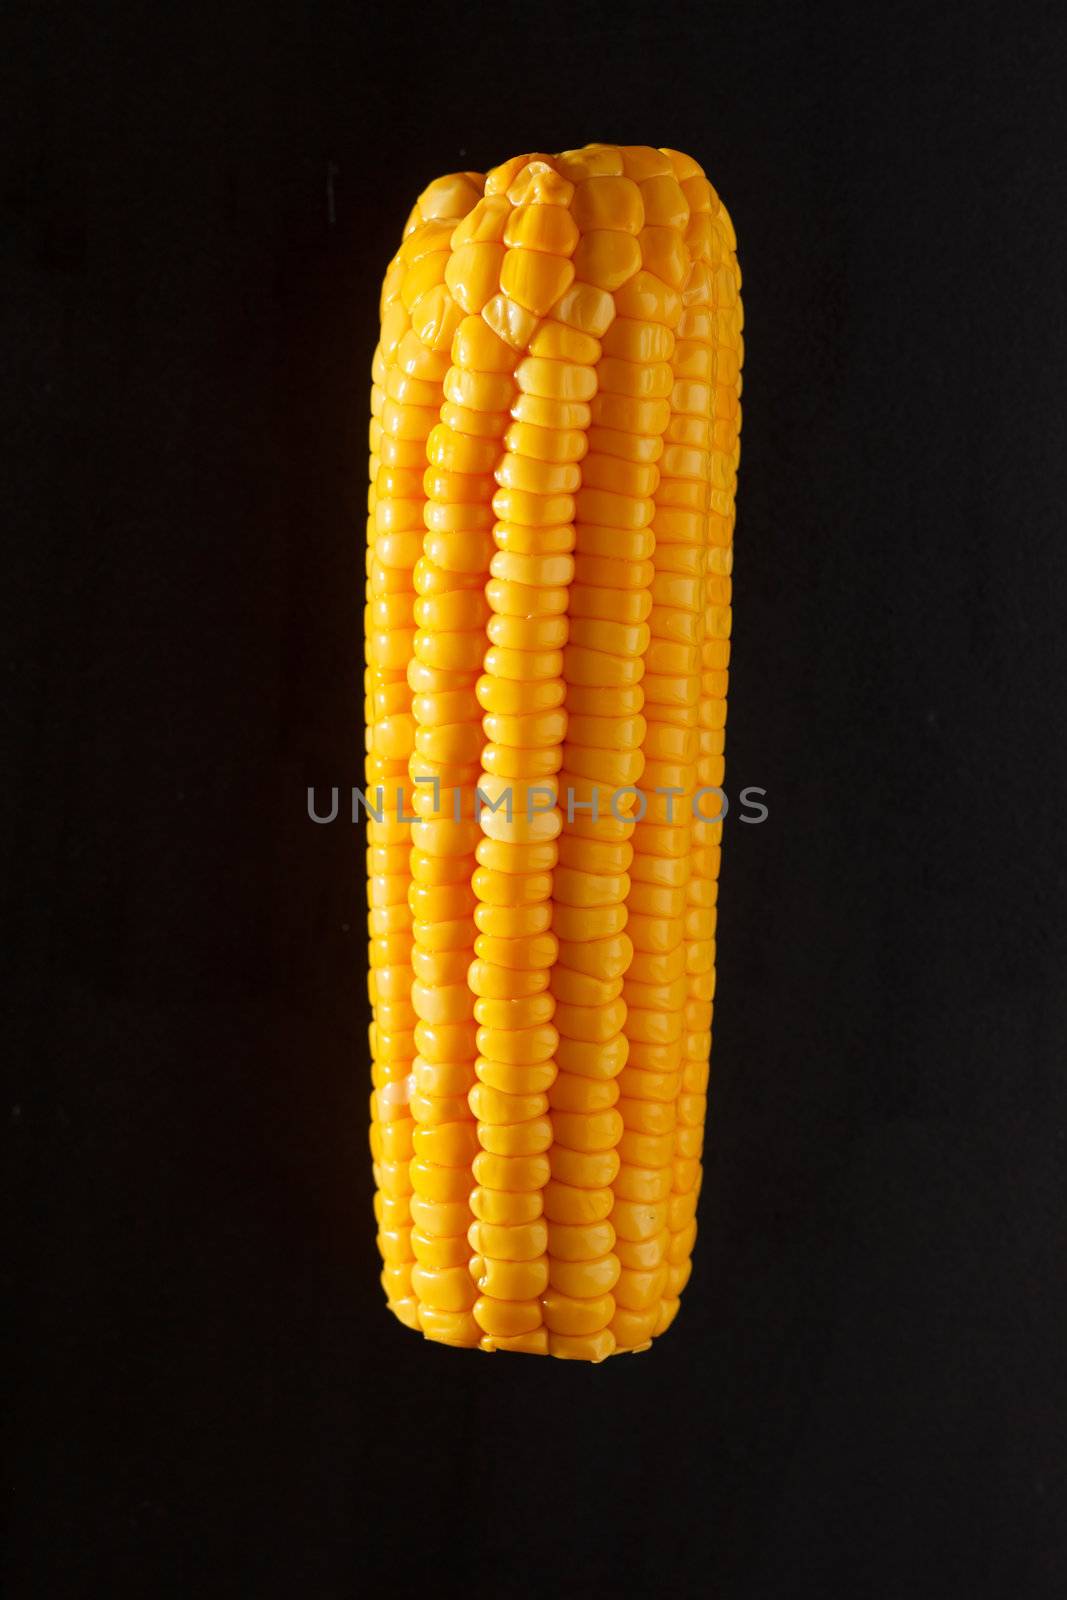 corn on black background by shebeko